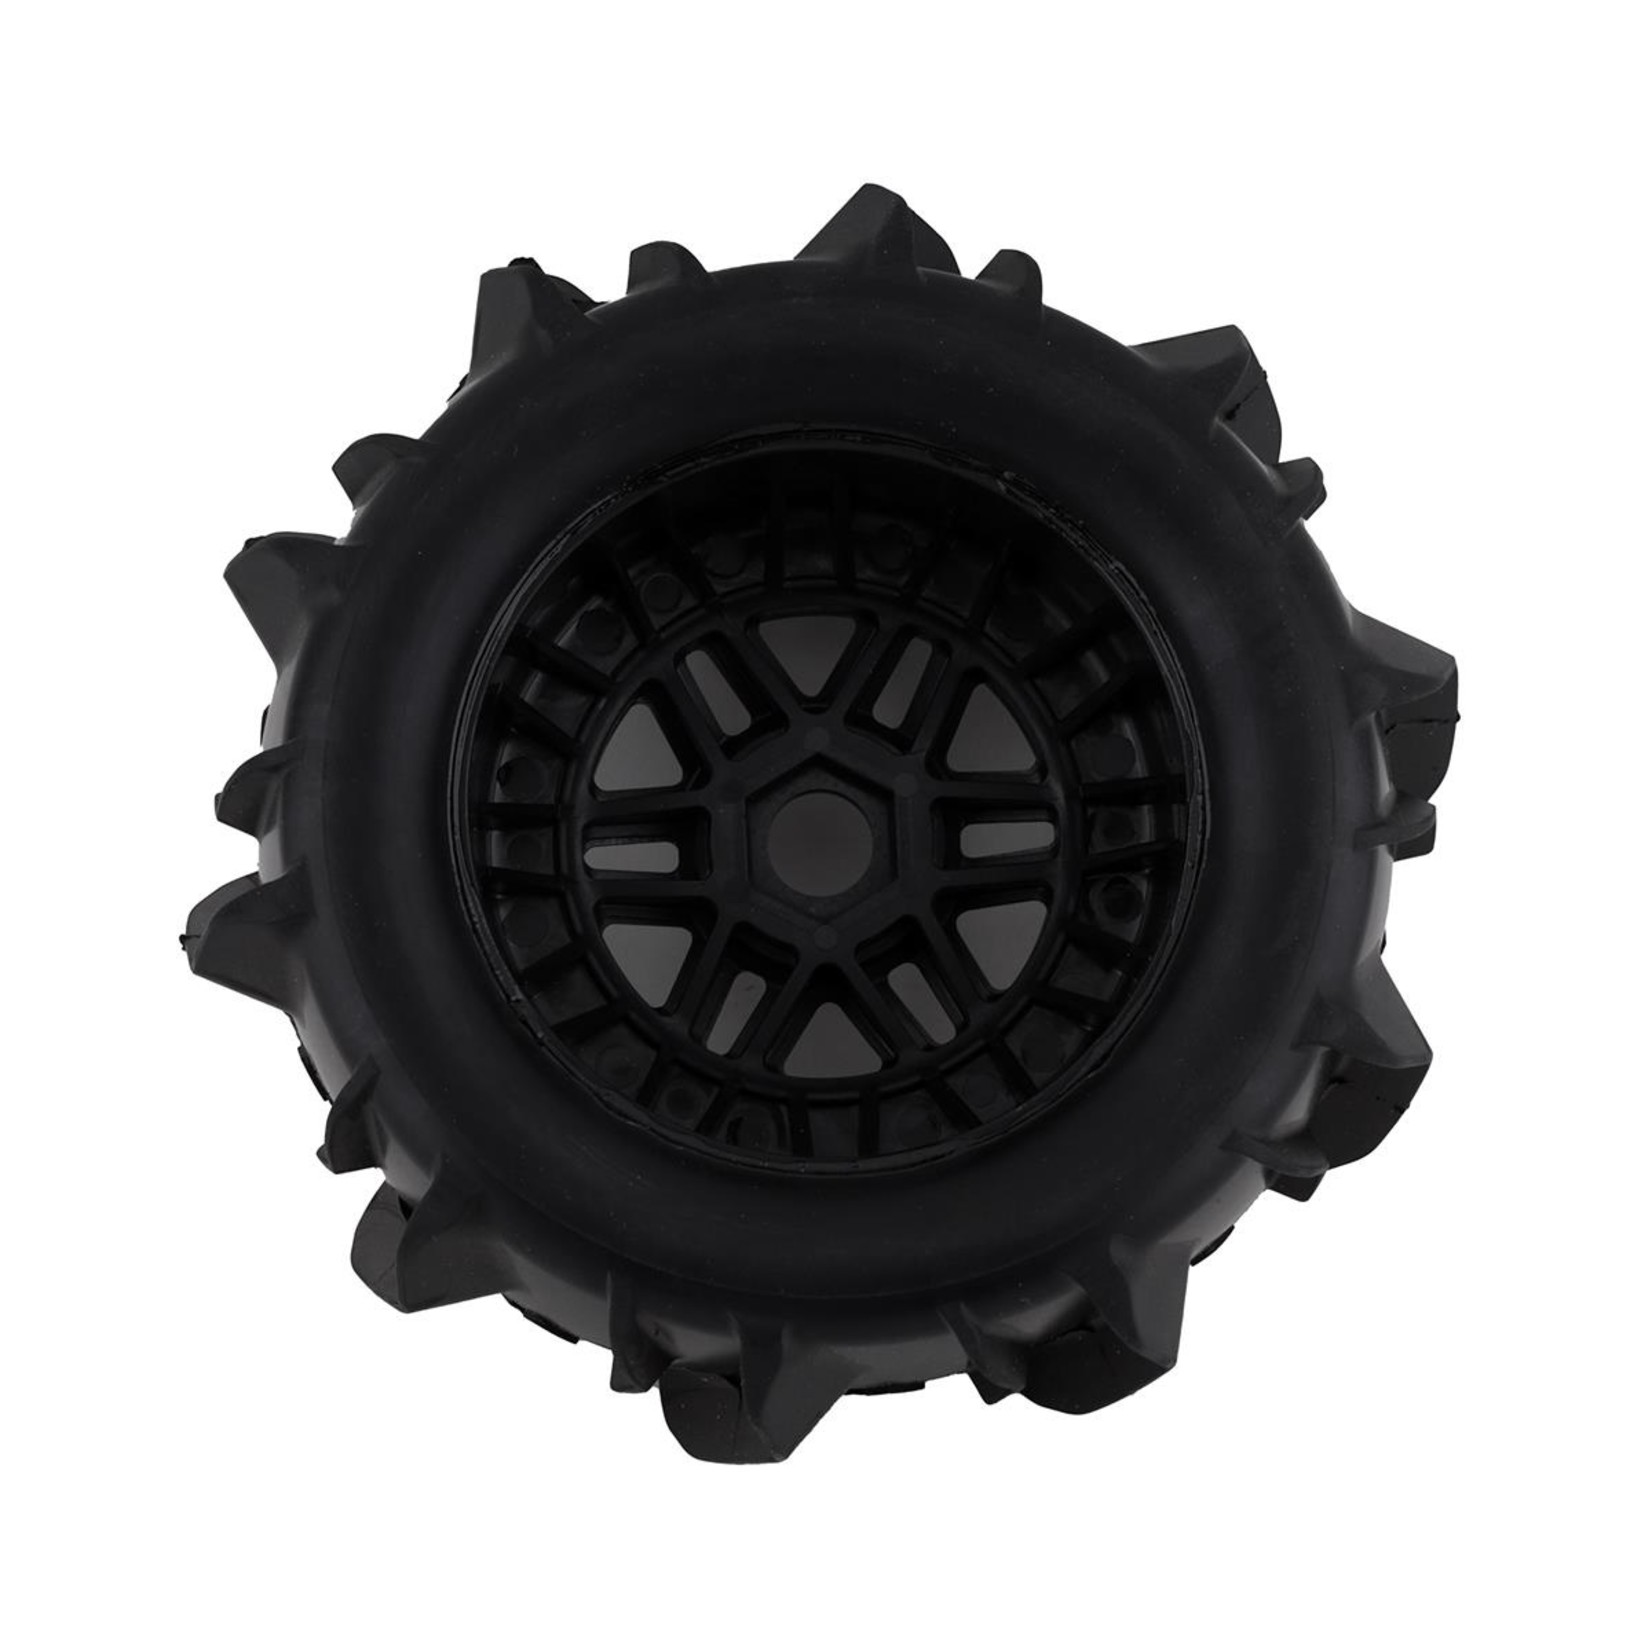 Pro-Line Pro-Line Dumont Paddle SC 2.2/3.0 Pre-Mounted Tires w/Mojave Wheels (Black) (2) w/17mm Hex #10189-10